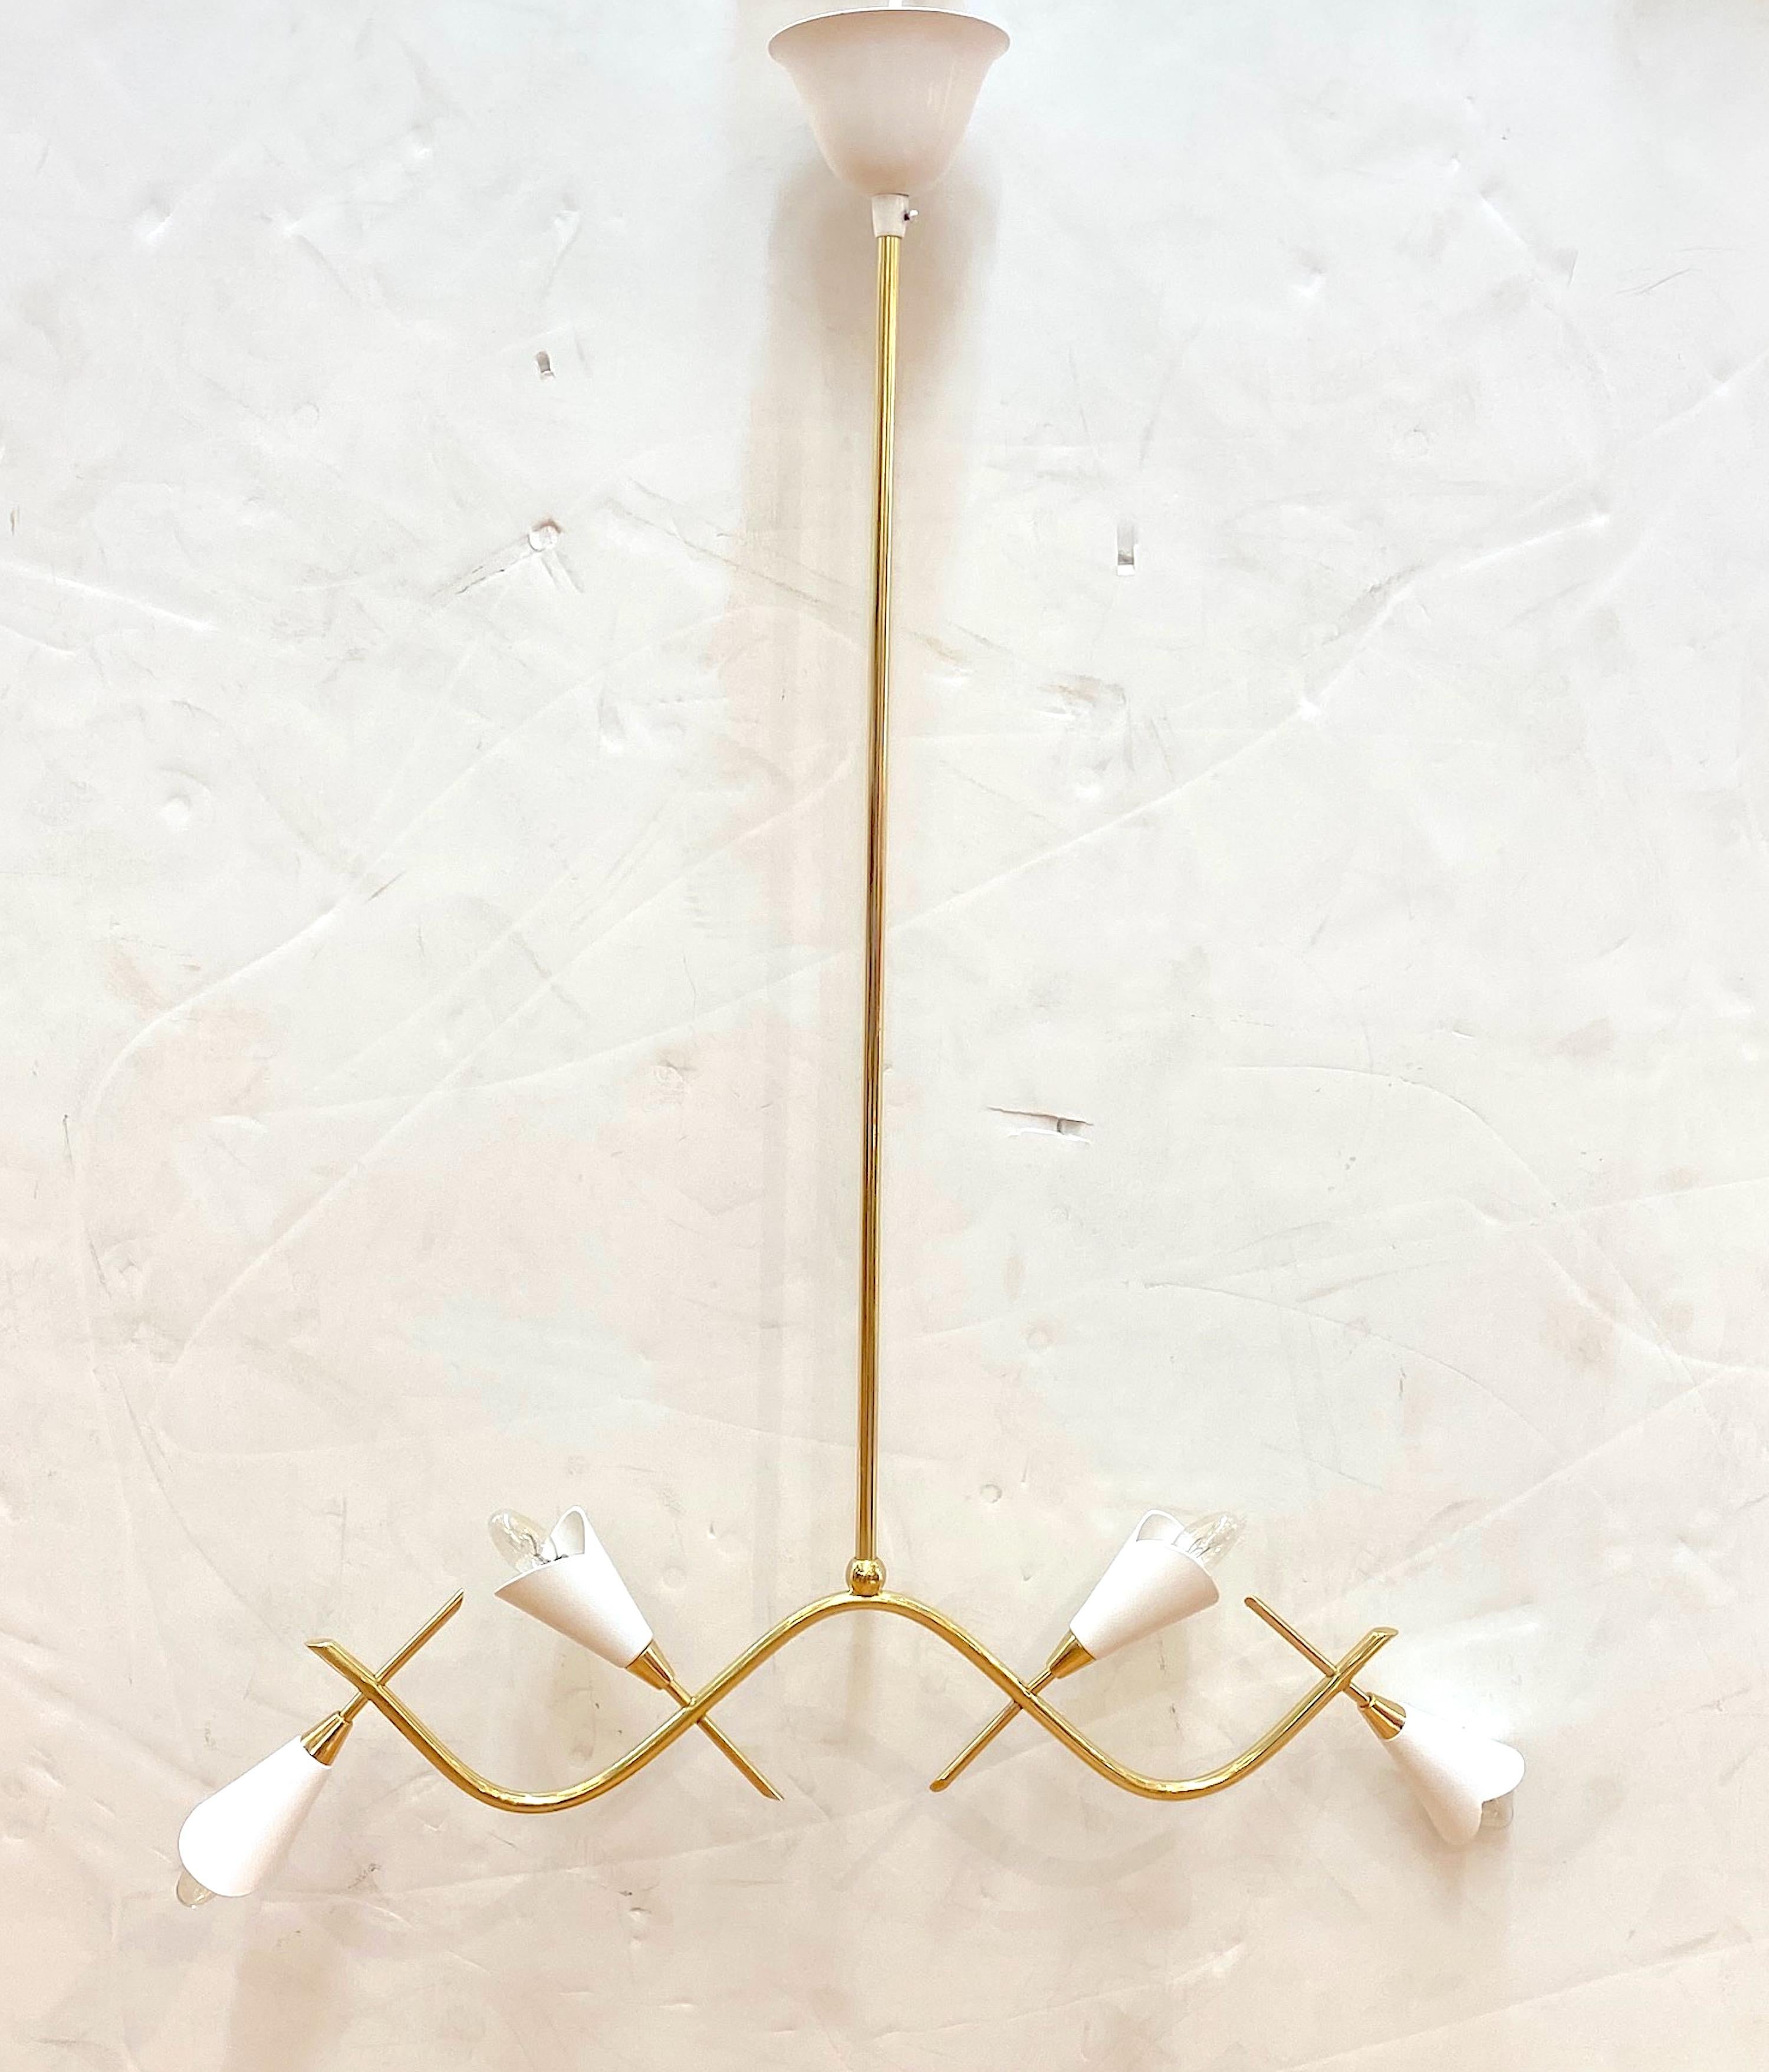 A lovely Italian 1950s modern chandelier in brass and white enamel. The design is horizontal in the fact that the four shades with sockets are in a line. Perfect for over a rectangular dining table, kitchen island, long hallway or long work desk.